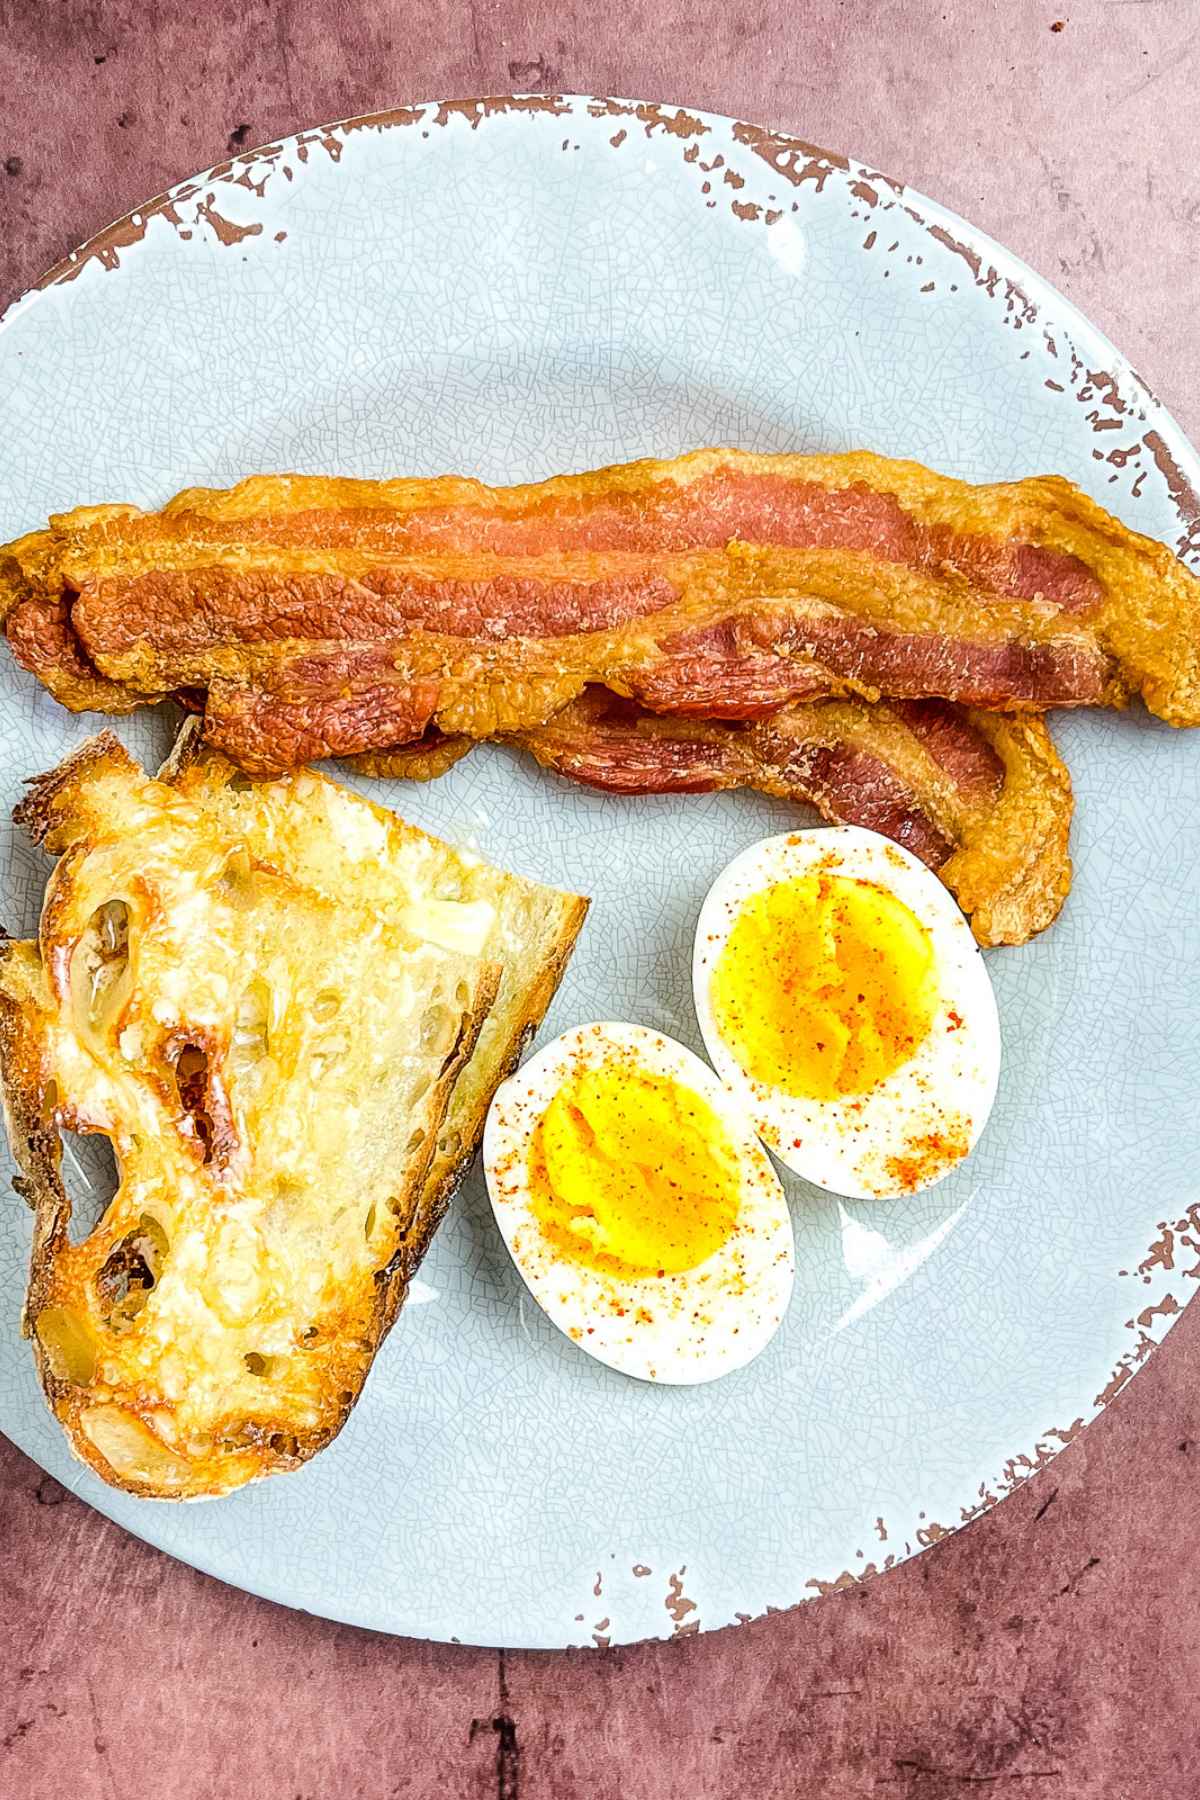 Two slices of bacon on a plate with a halved hard boiled egg and buttered toast.